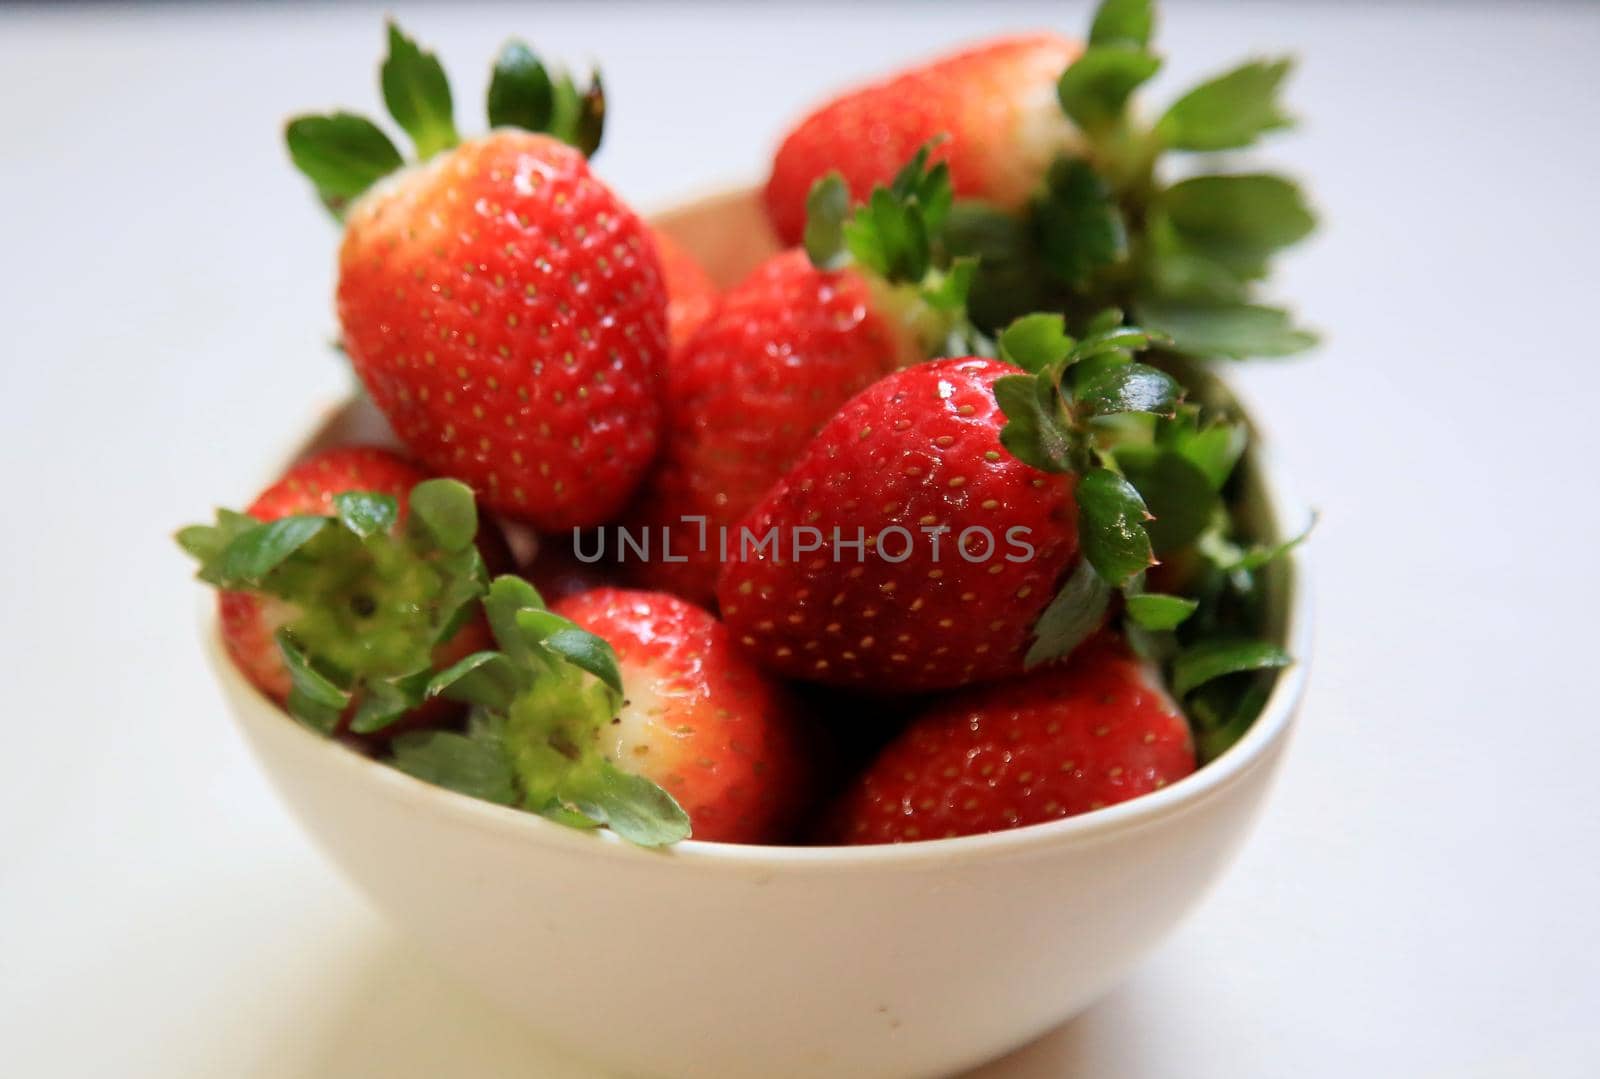 salvador, bahia / brazil - april 28, 2020: pot with strawberries are seen in the city of Salvador.